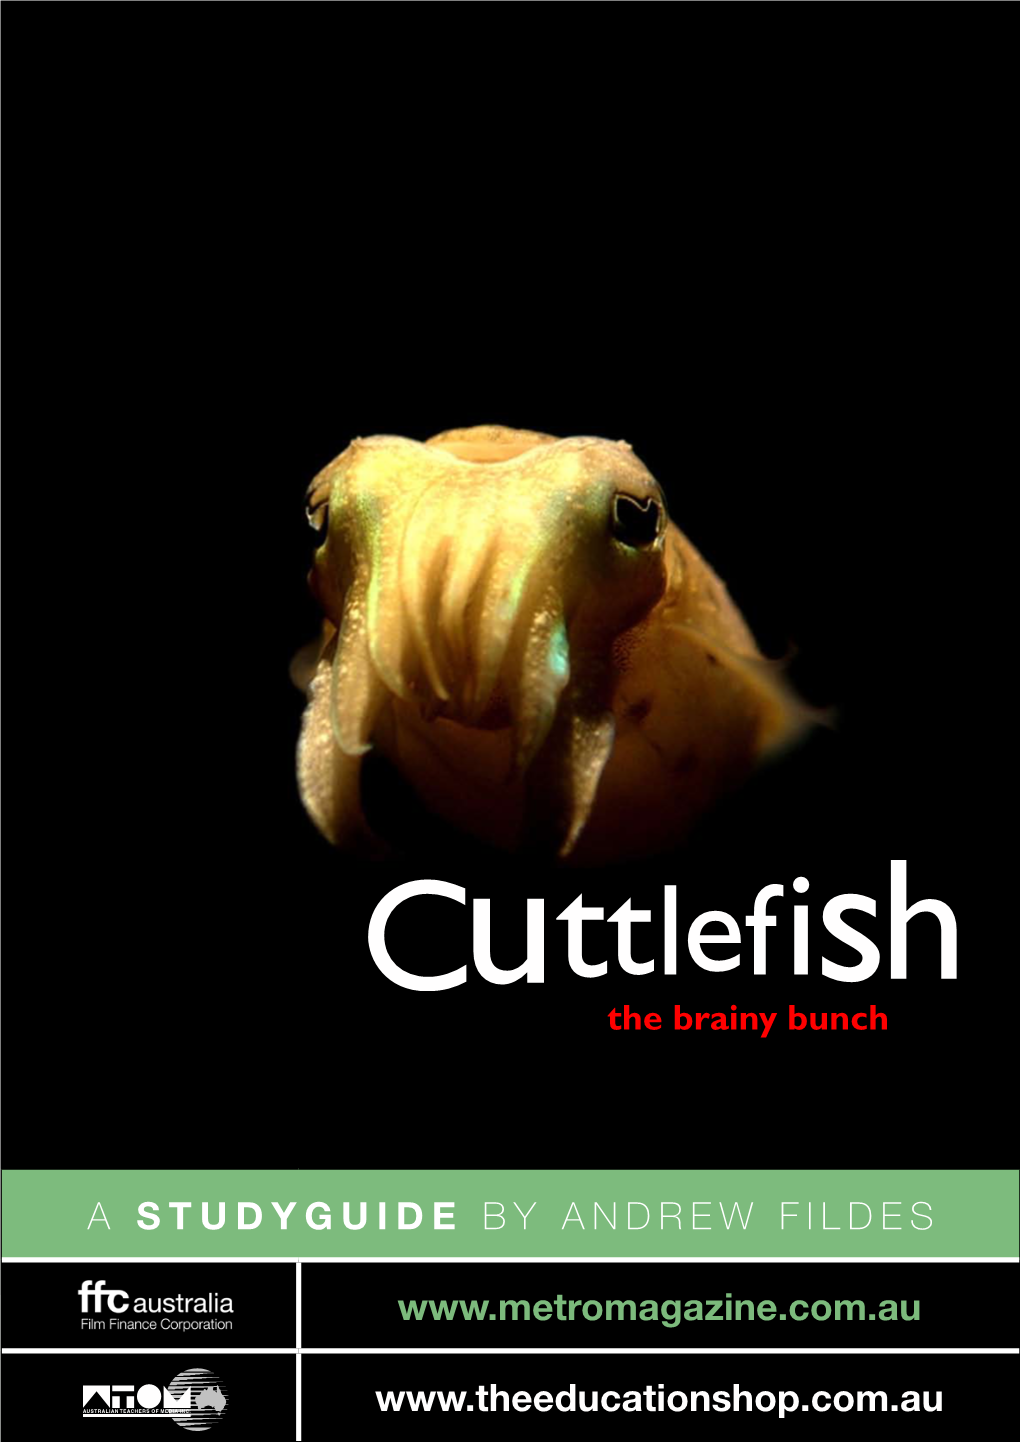 A Studyguide by Andrew Fildes